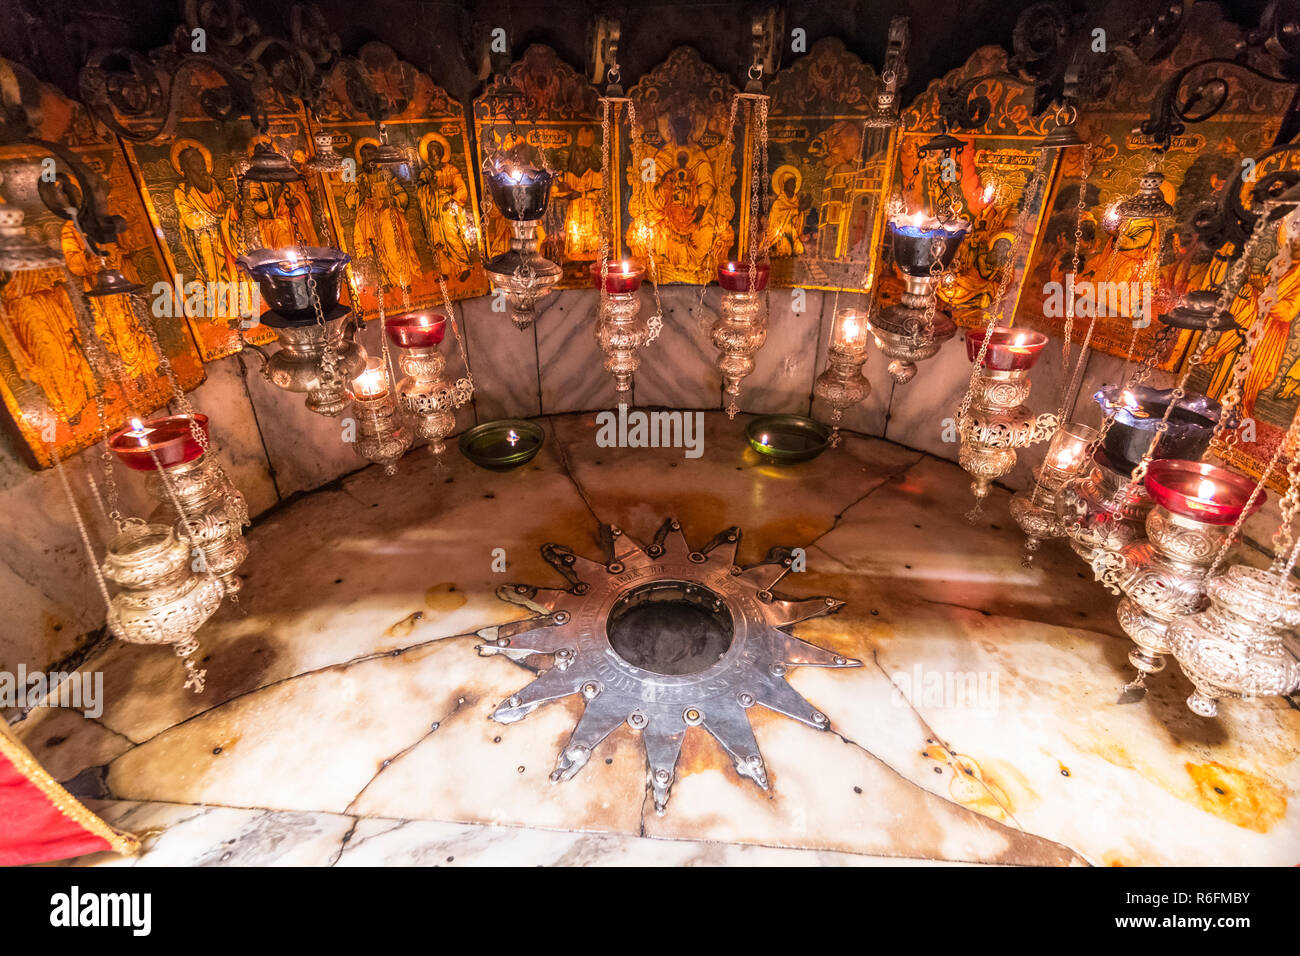 A Silver Star Marks The Traditional Site Of The Birth Of Jesus In A Grotto Underneath Bethlehem'S Church Of The Nativity, Palestine Stock Photo